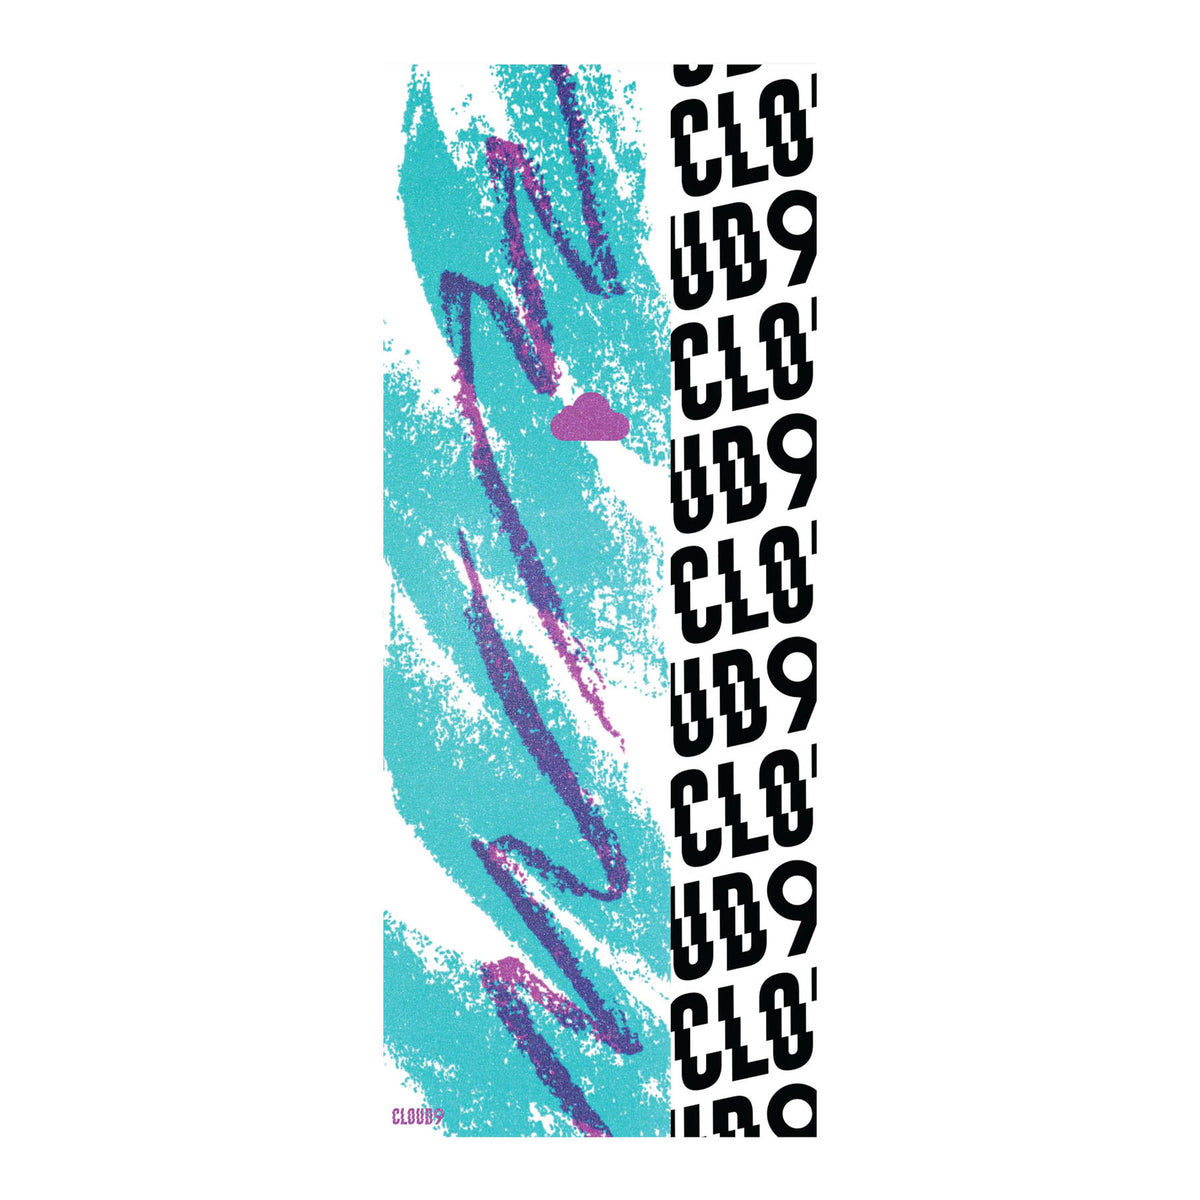 Front and back view of the Cloud 9 90s Griptape